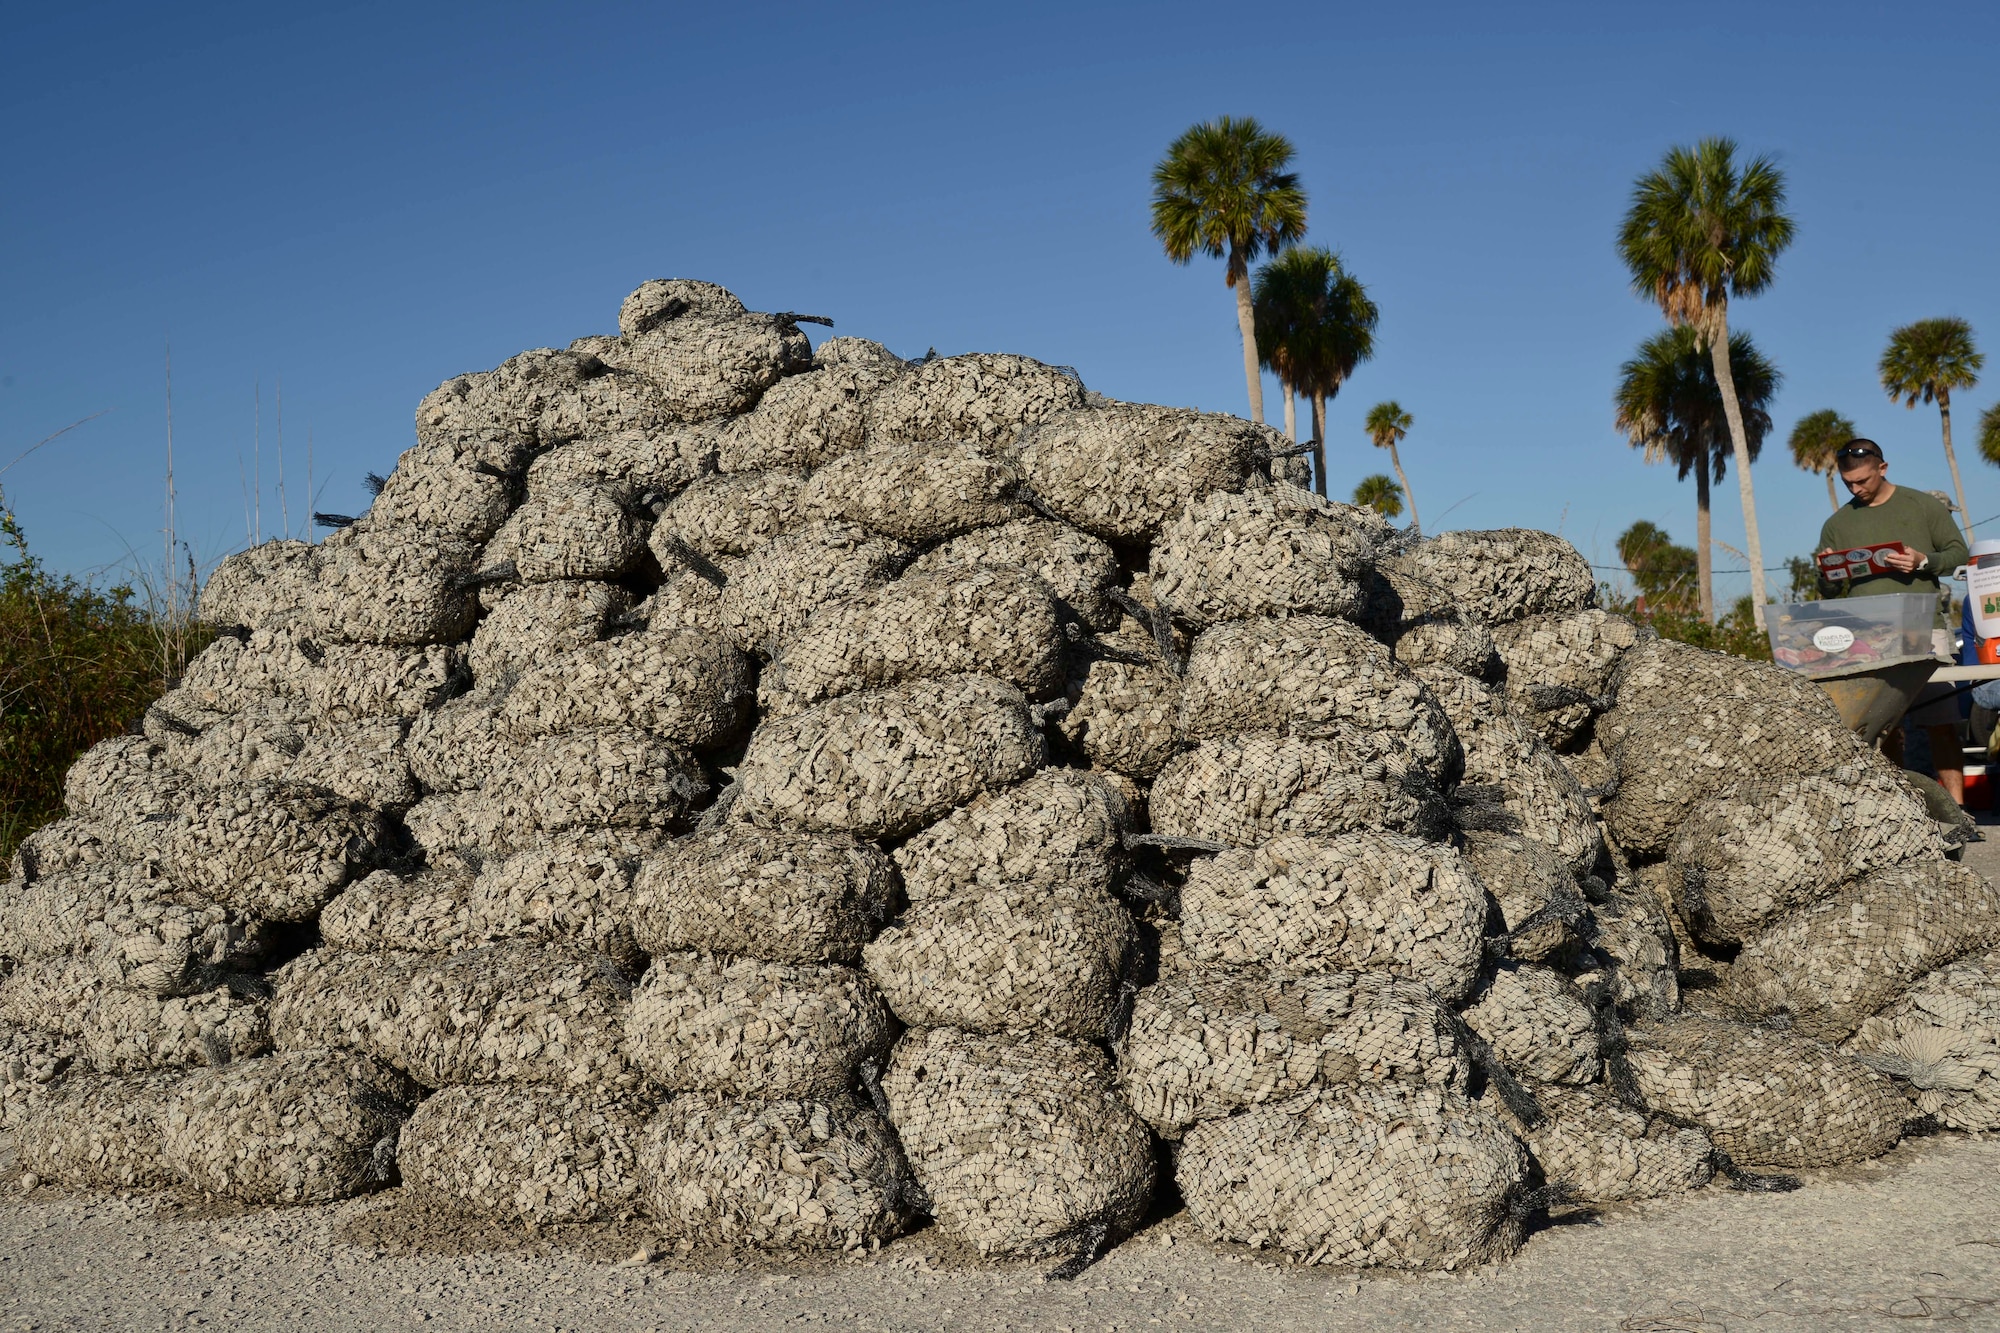 Eight hundred bags of shells sit in a pile at the Marina on MacDill Air Force Base, Fla., Dec. 11, 2015. Volunteers gathered, bagged, transported and installed 14 tons of shells to build an oyster reef habitat along the shoreline. (U.S. Air Force photo by Senior Airman Vernon L. Fowler Jr./Released)